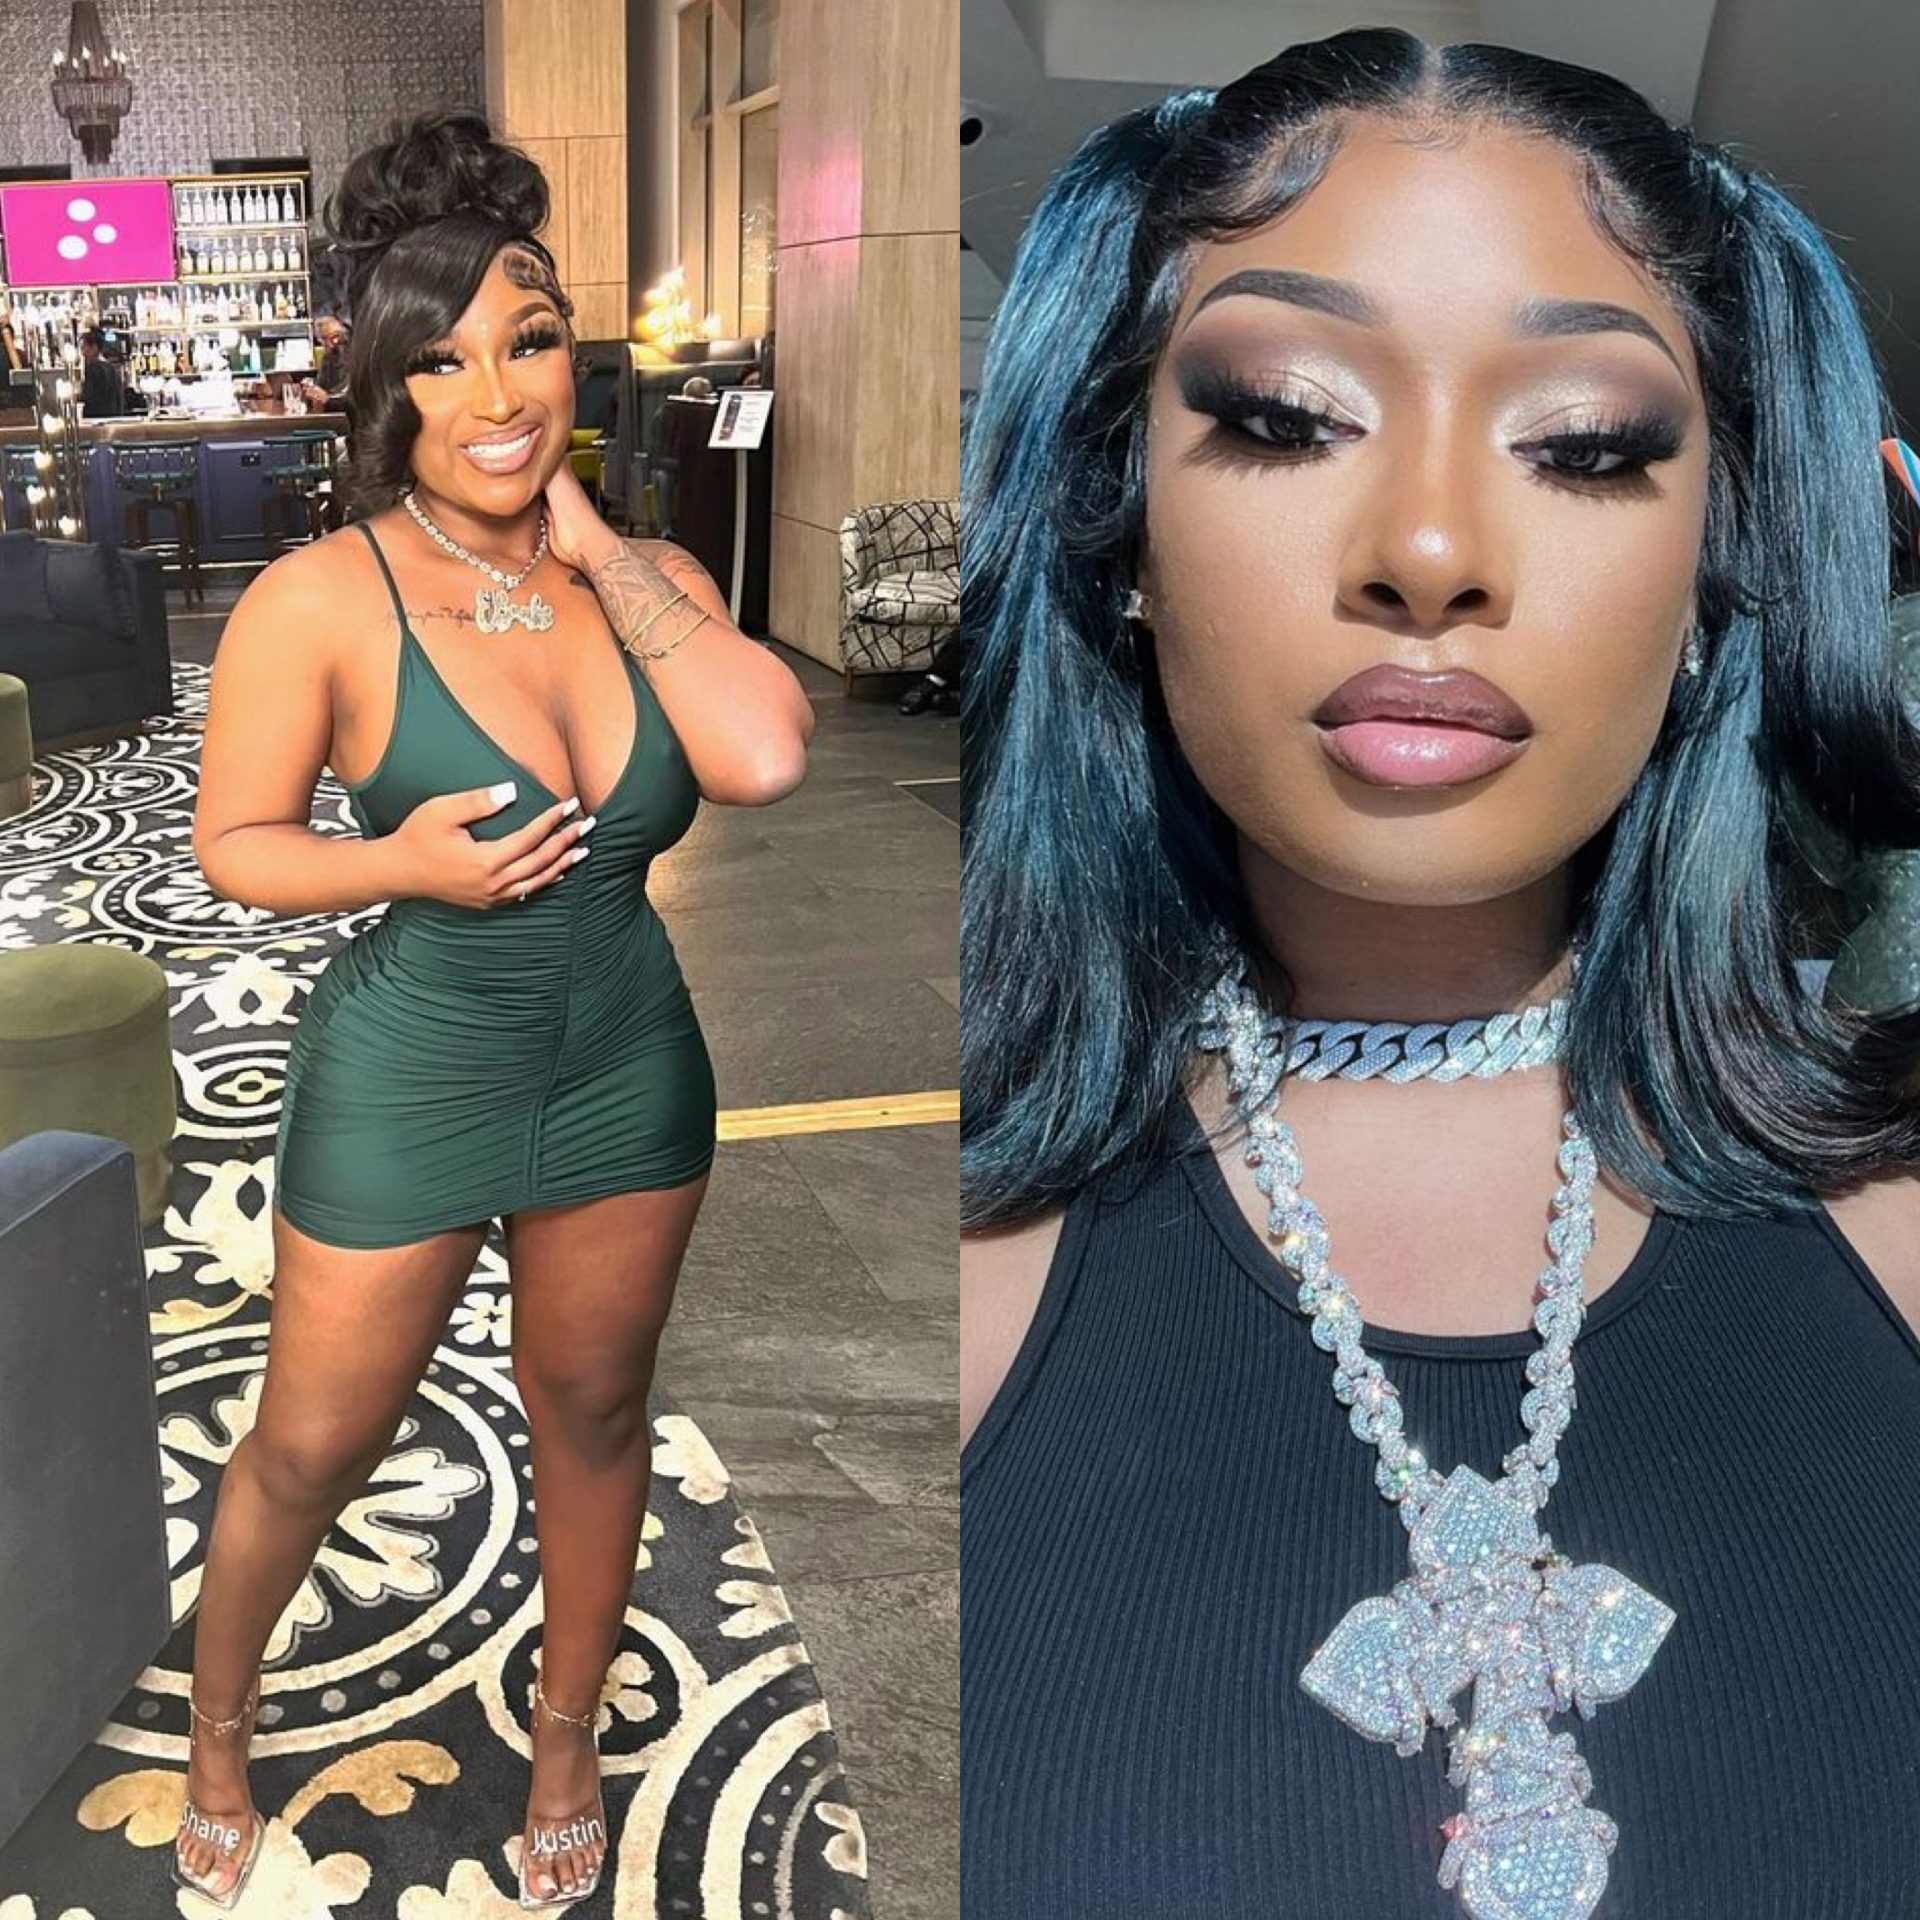 People online call Erica Banks to copy Megan Thee Stallion’s 'Thots**t' music video thumbnail